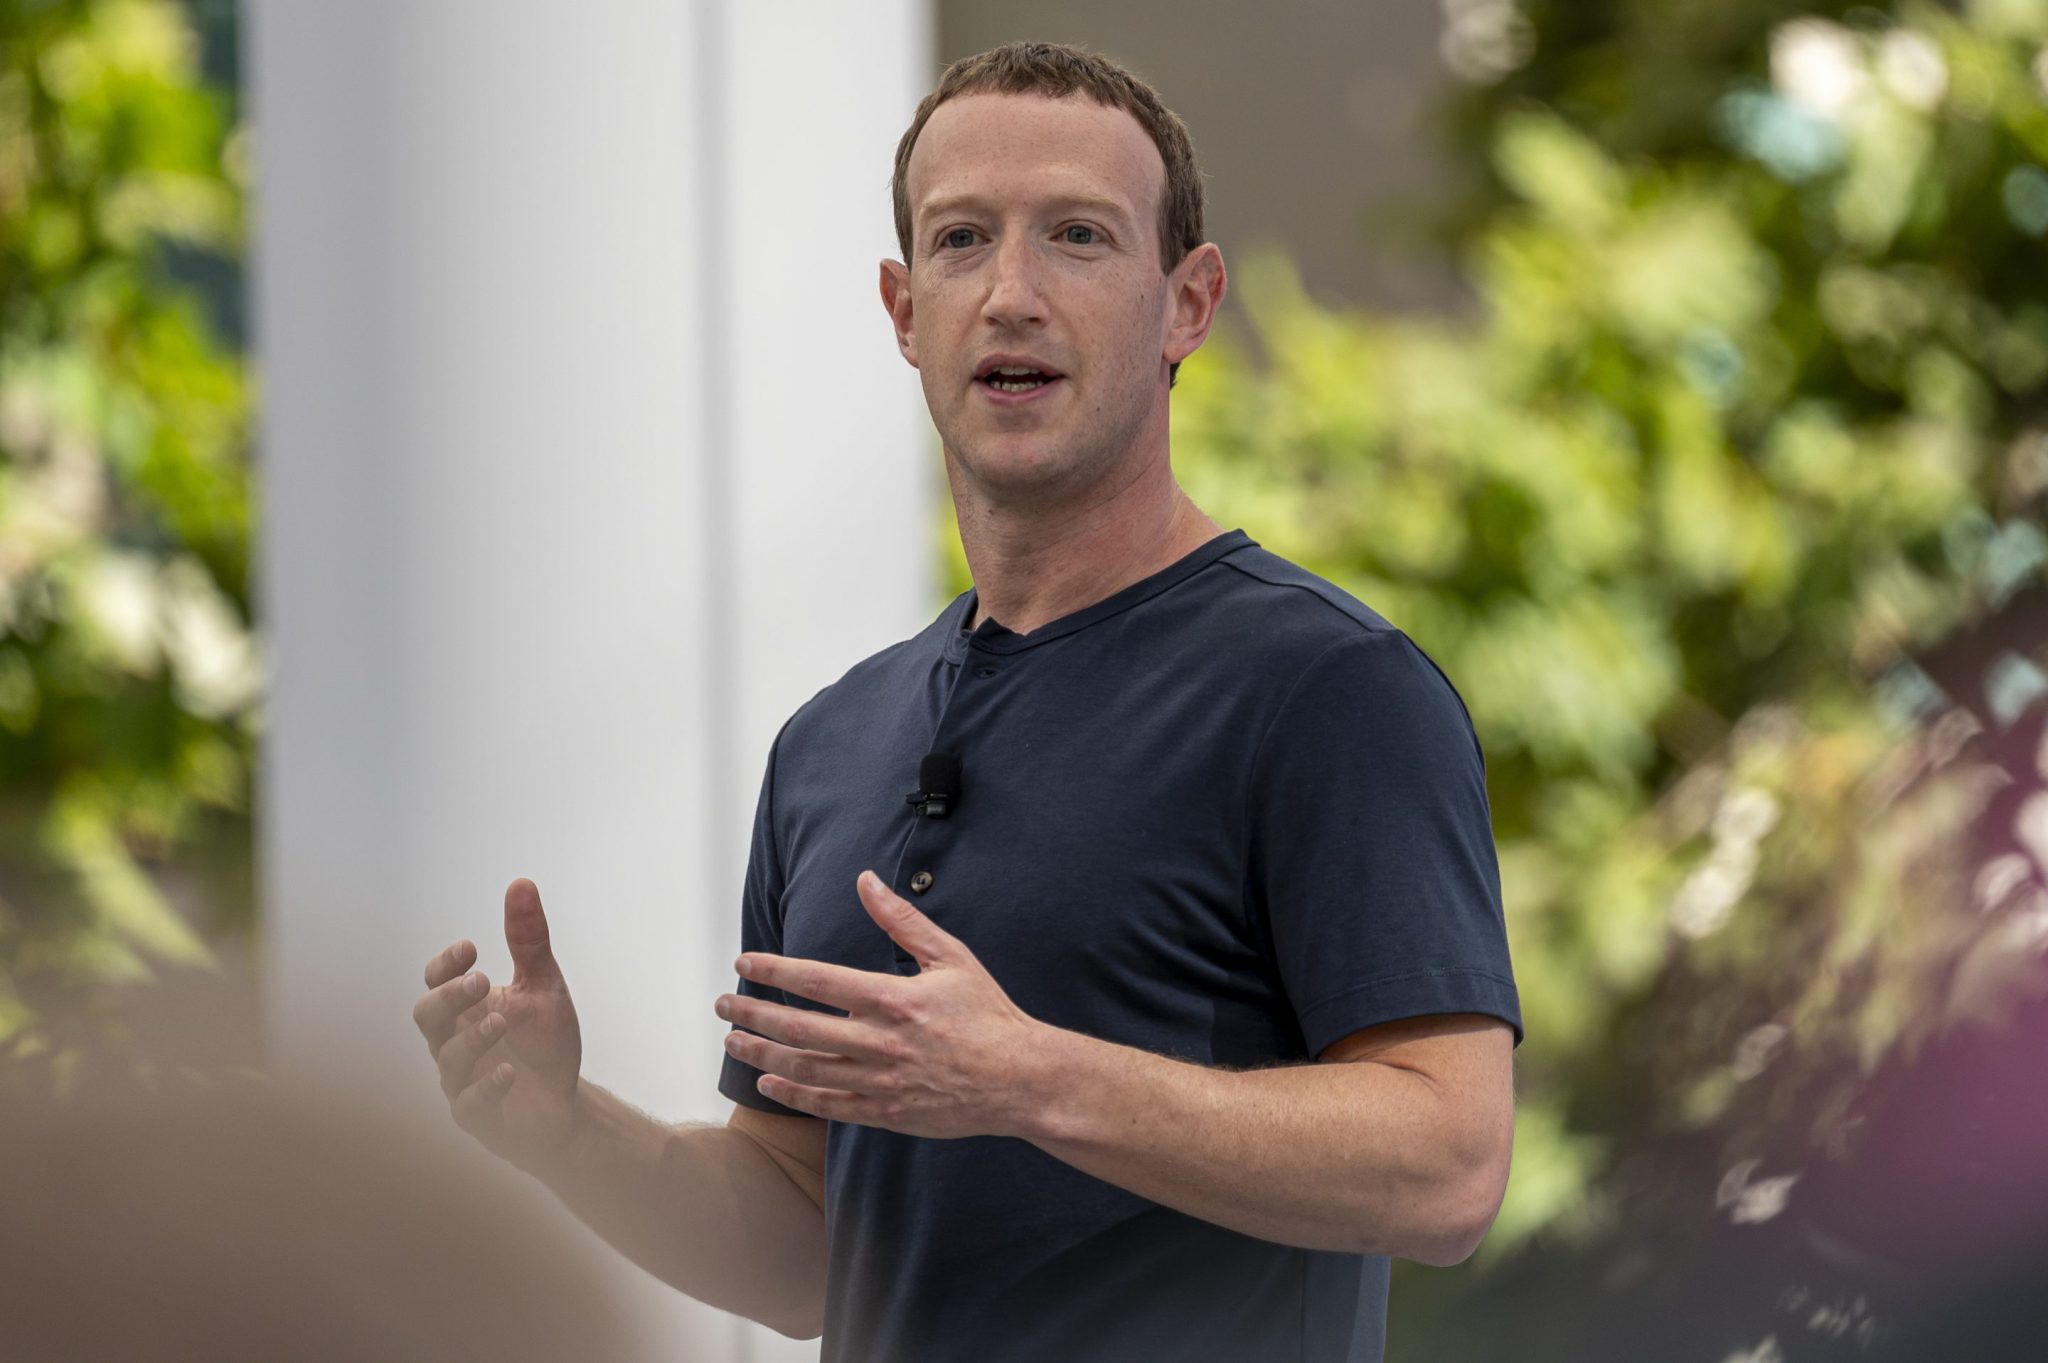 Disinformation scholar accuses Harvard of muzzling her work related to Facebook after Mark Zuckerberg donated $500 million to the university